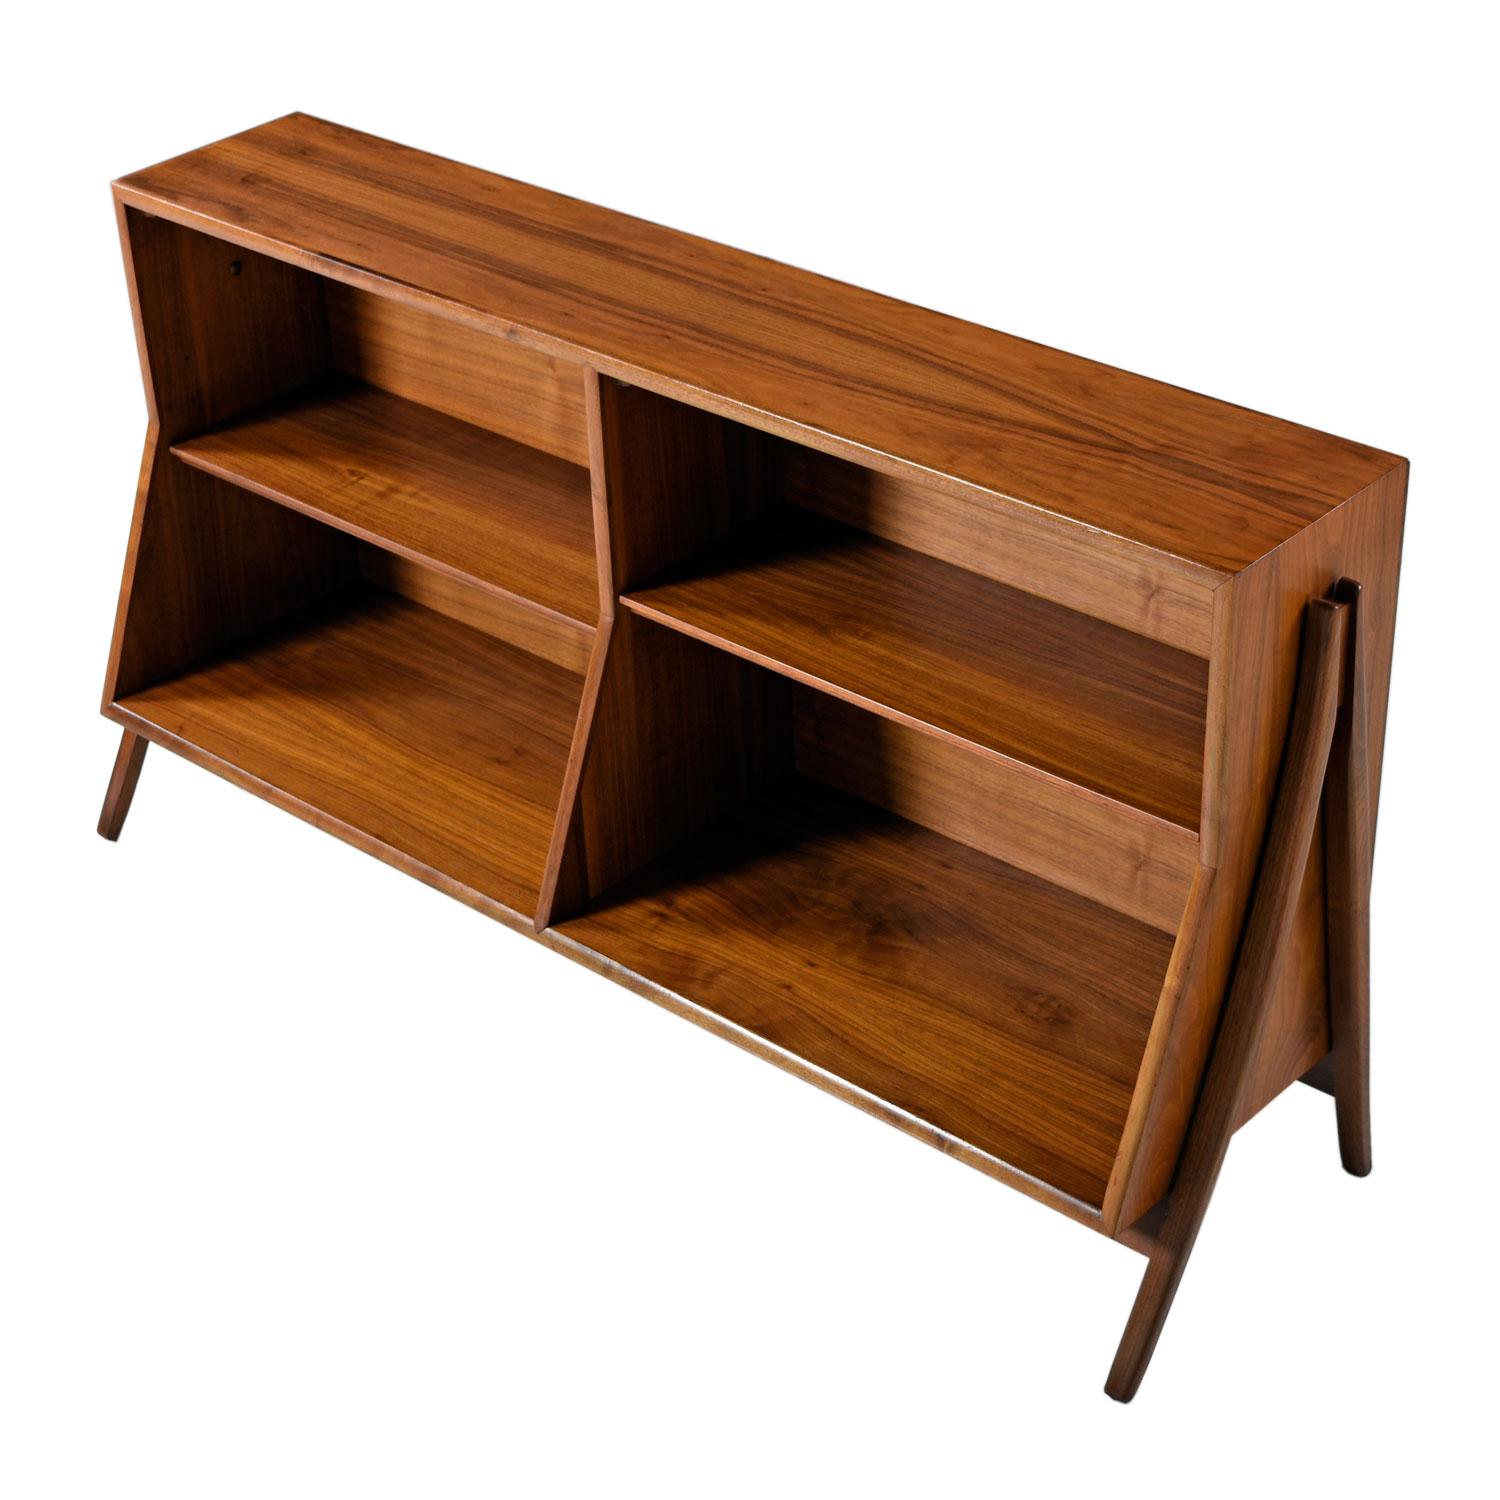 Super stylish Mid-Century Modern bookcase. Designed by Kipp Stewart and Stewart MacDougall for Drexel. Part of their famed, “Declaration” collection. A rare piece that hardly surfaces. Check out the ever graceful, swooping legs on the side. Fixed to